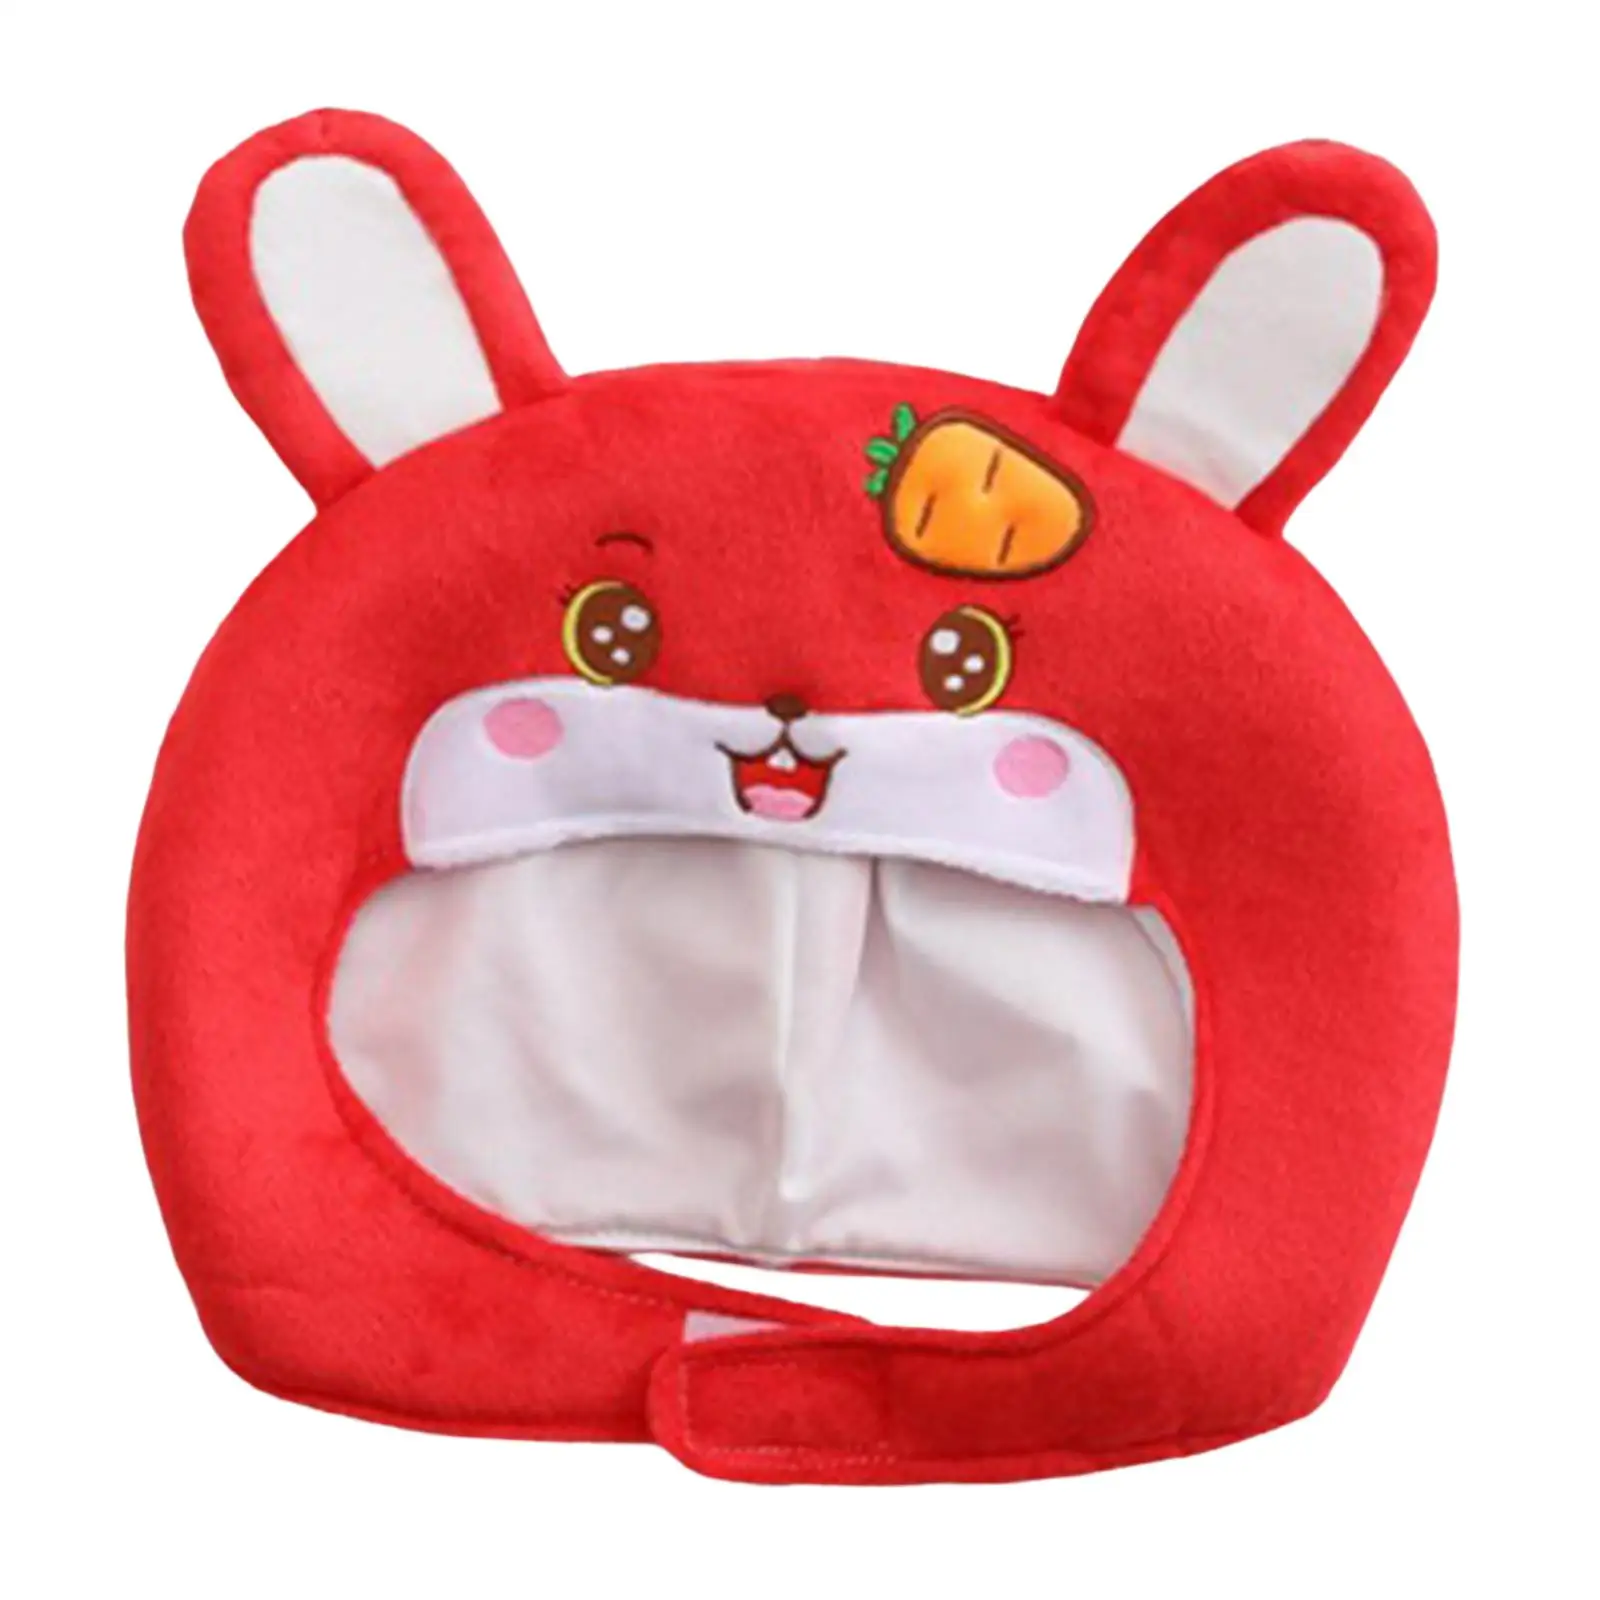 Plush Rabbit Ear Hat Lightweight Headband for Party Supplies Holidays Cosplay Stage Performance